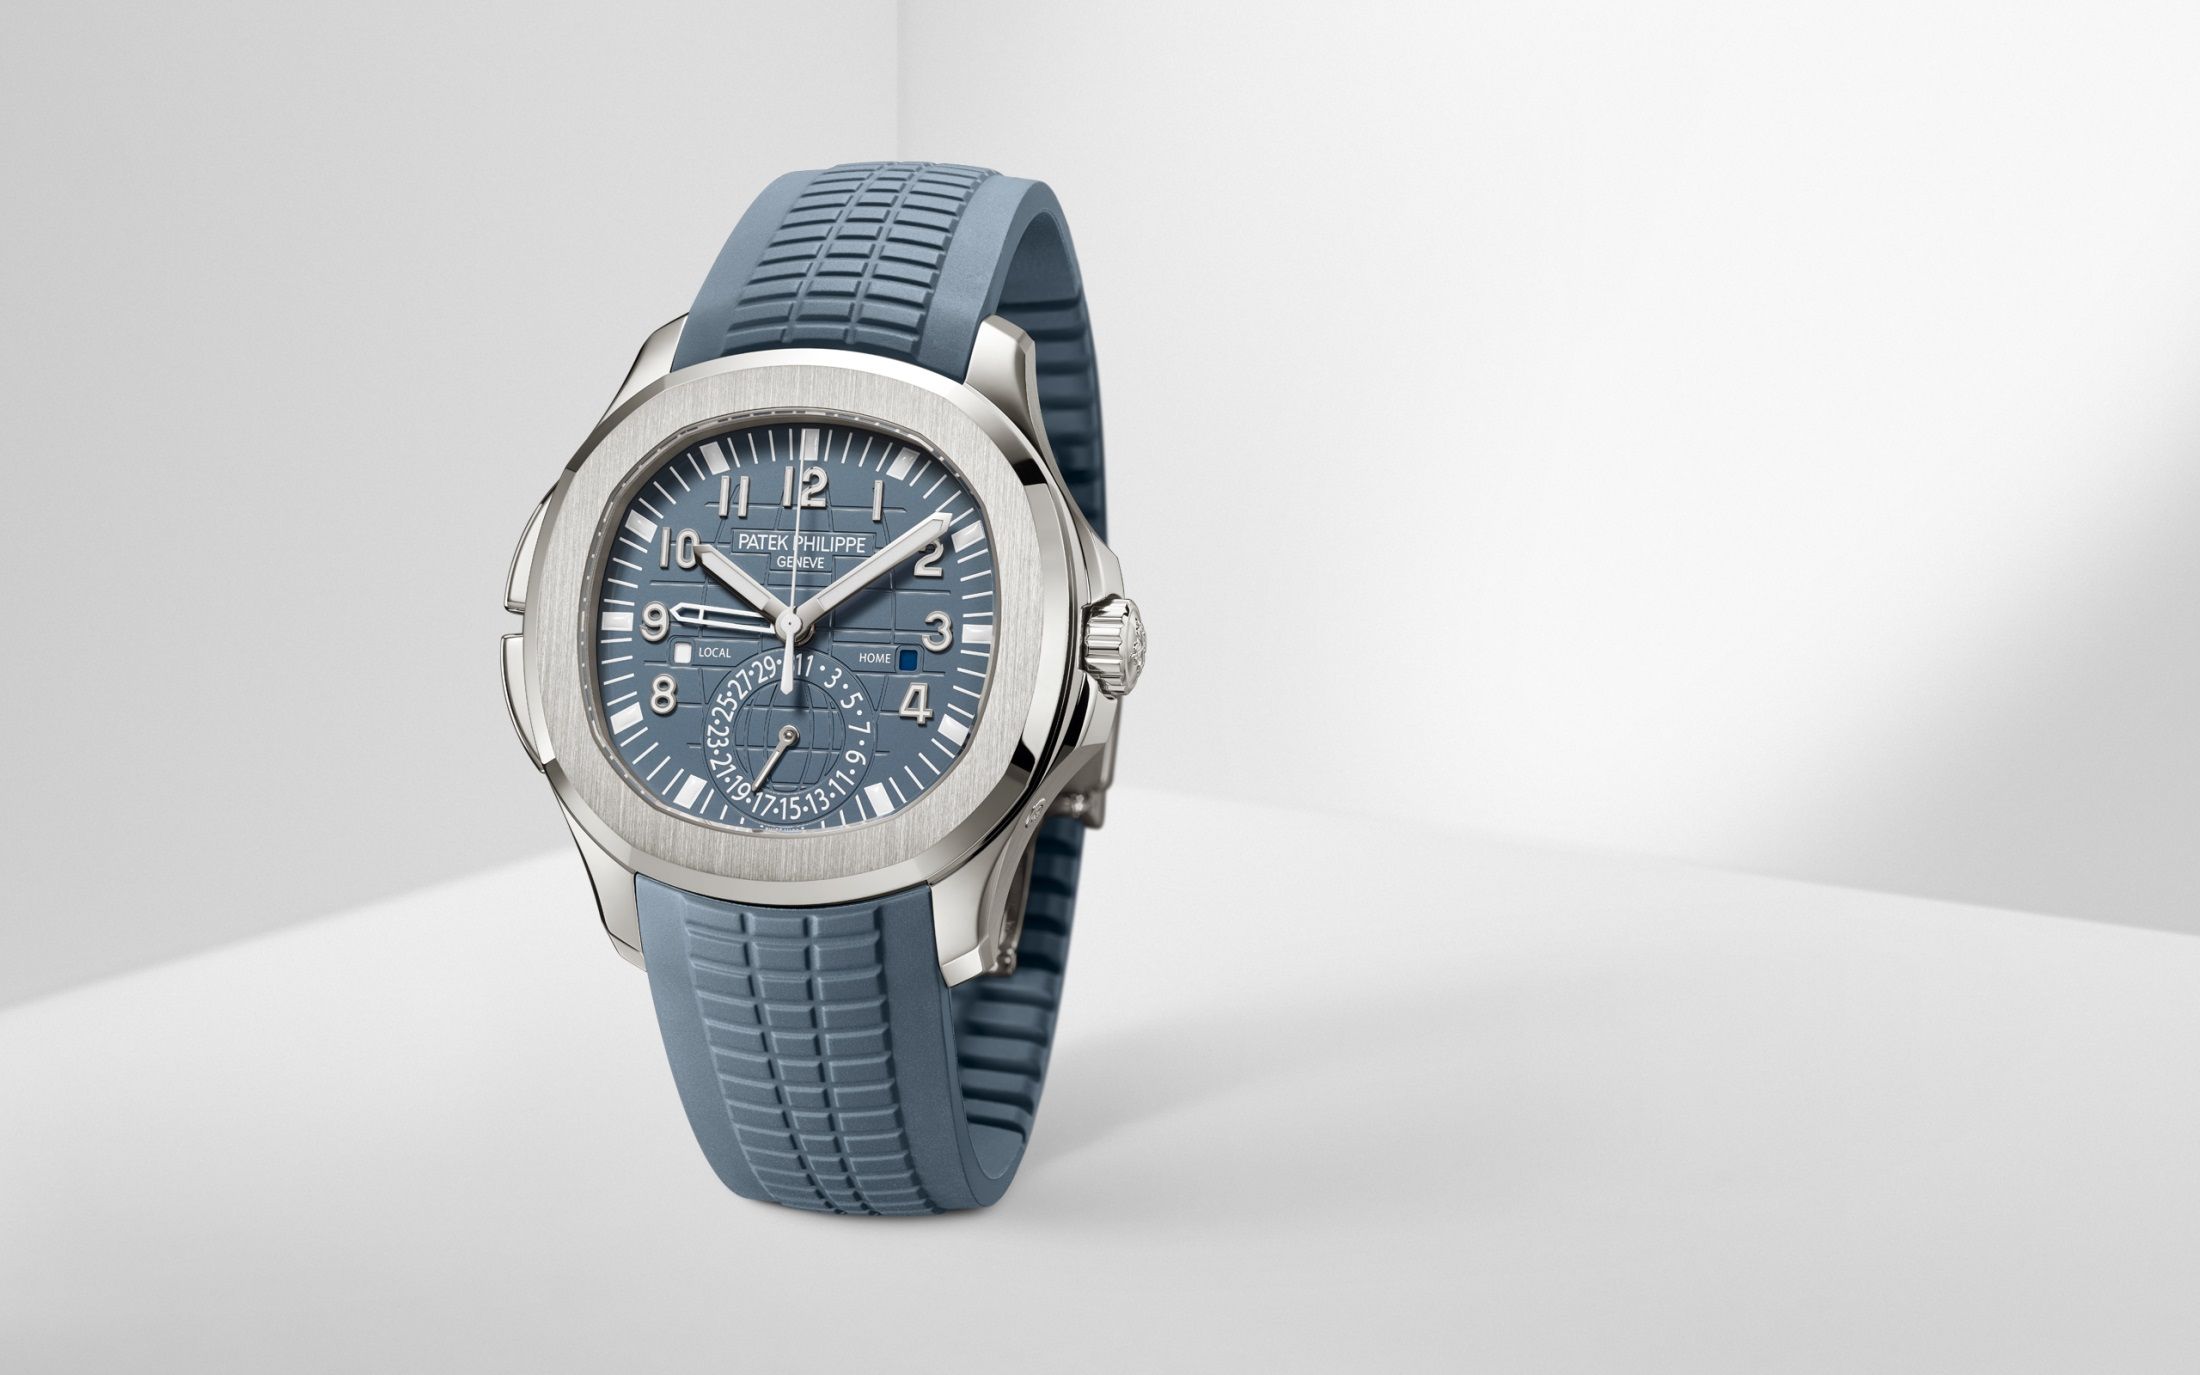 The Patek Philippe Aquanaut Travel Time Reference 5164 is a contemporary, elegant and casual travel watch